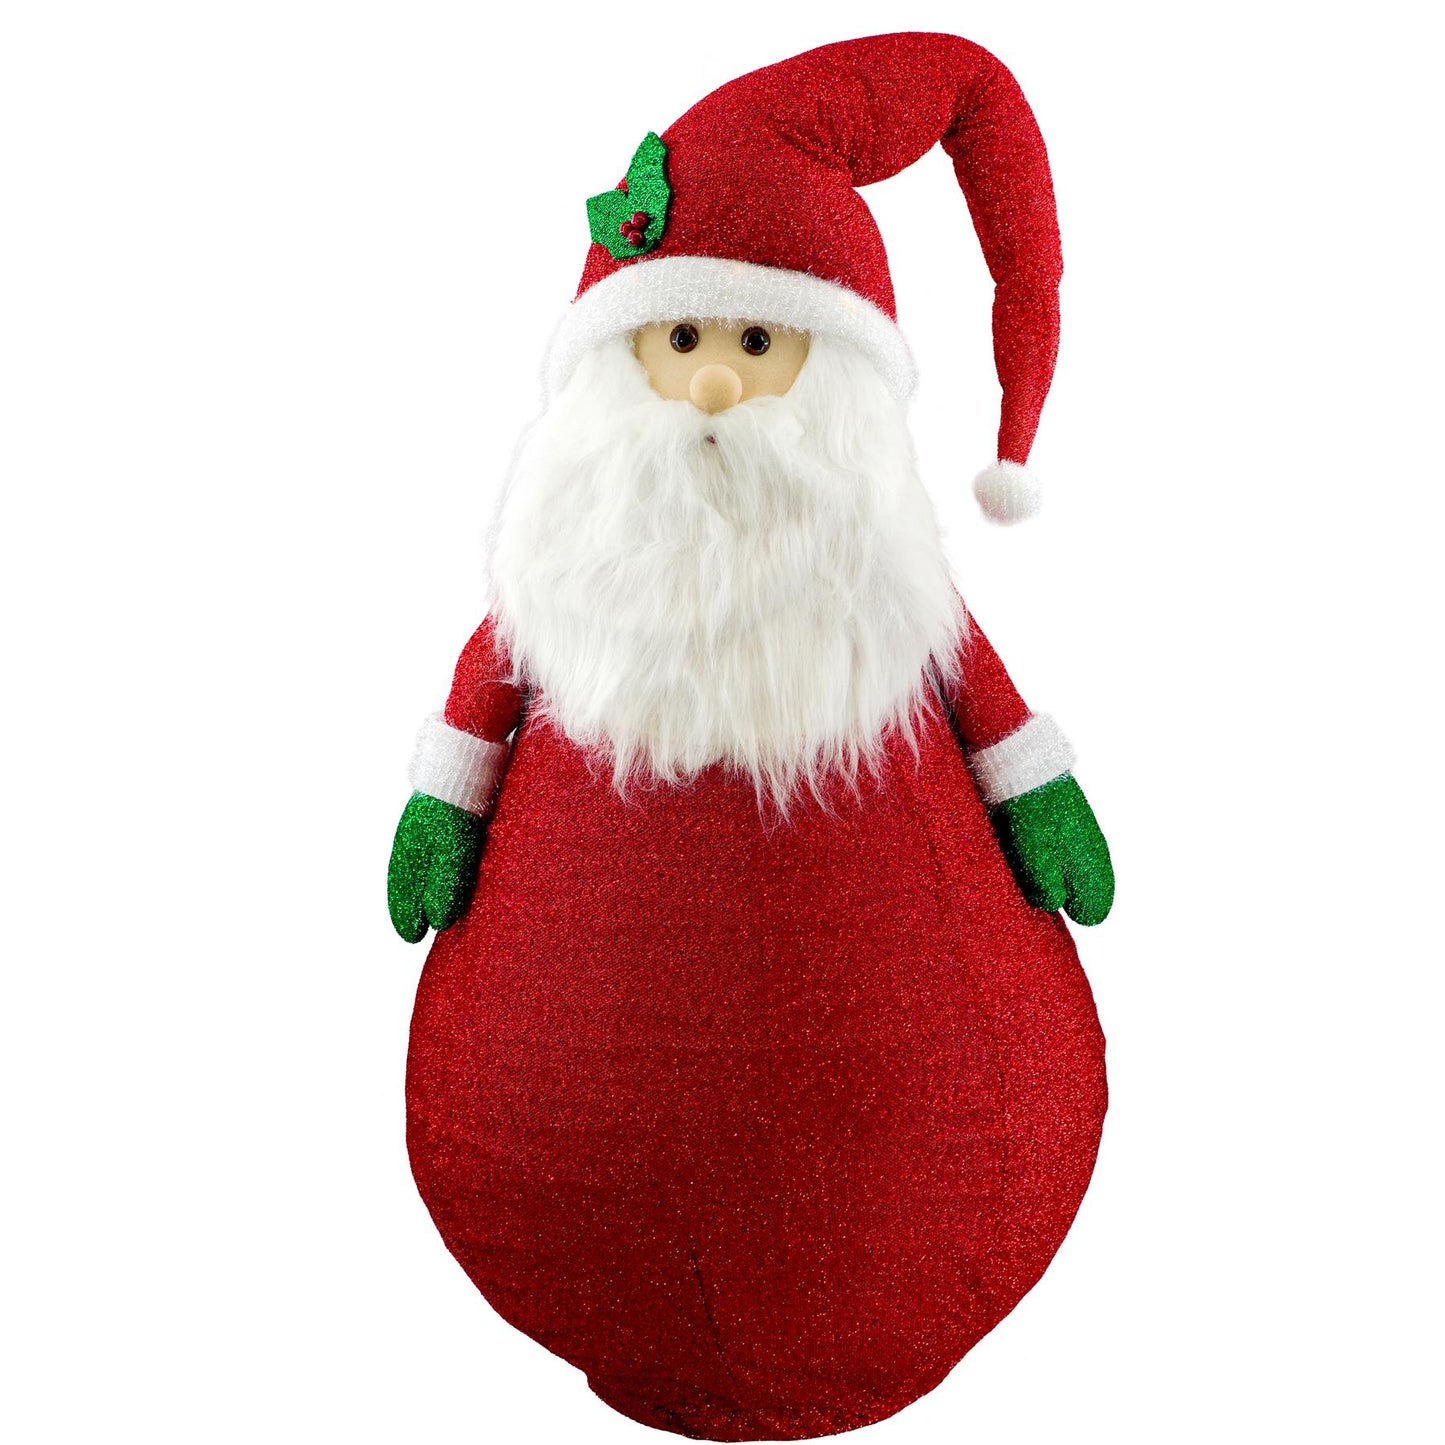 Collapsible Santa Christmas Decoration with LED lights by The Magic Toy Shop - UKBuyZone